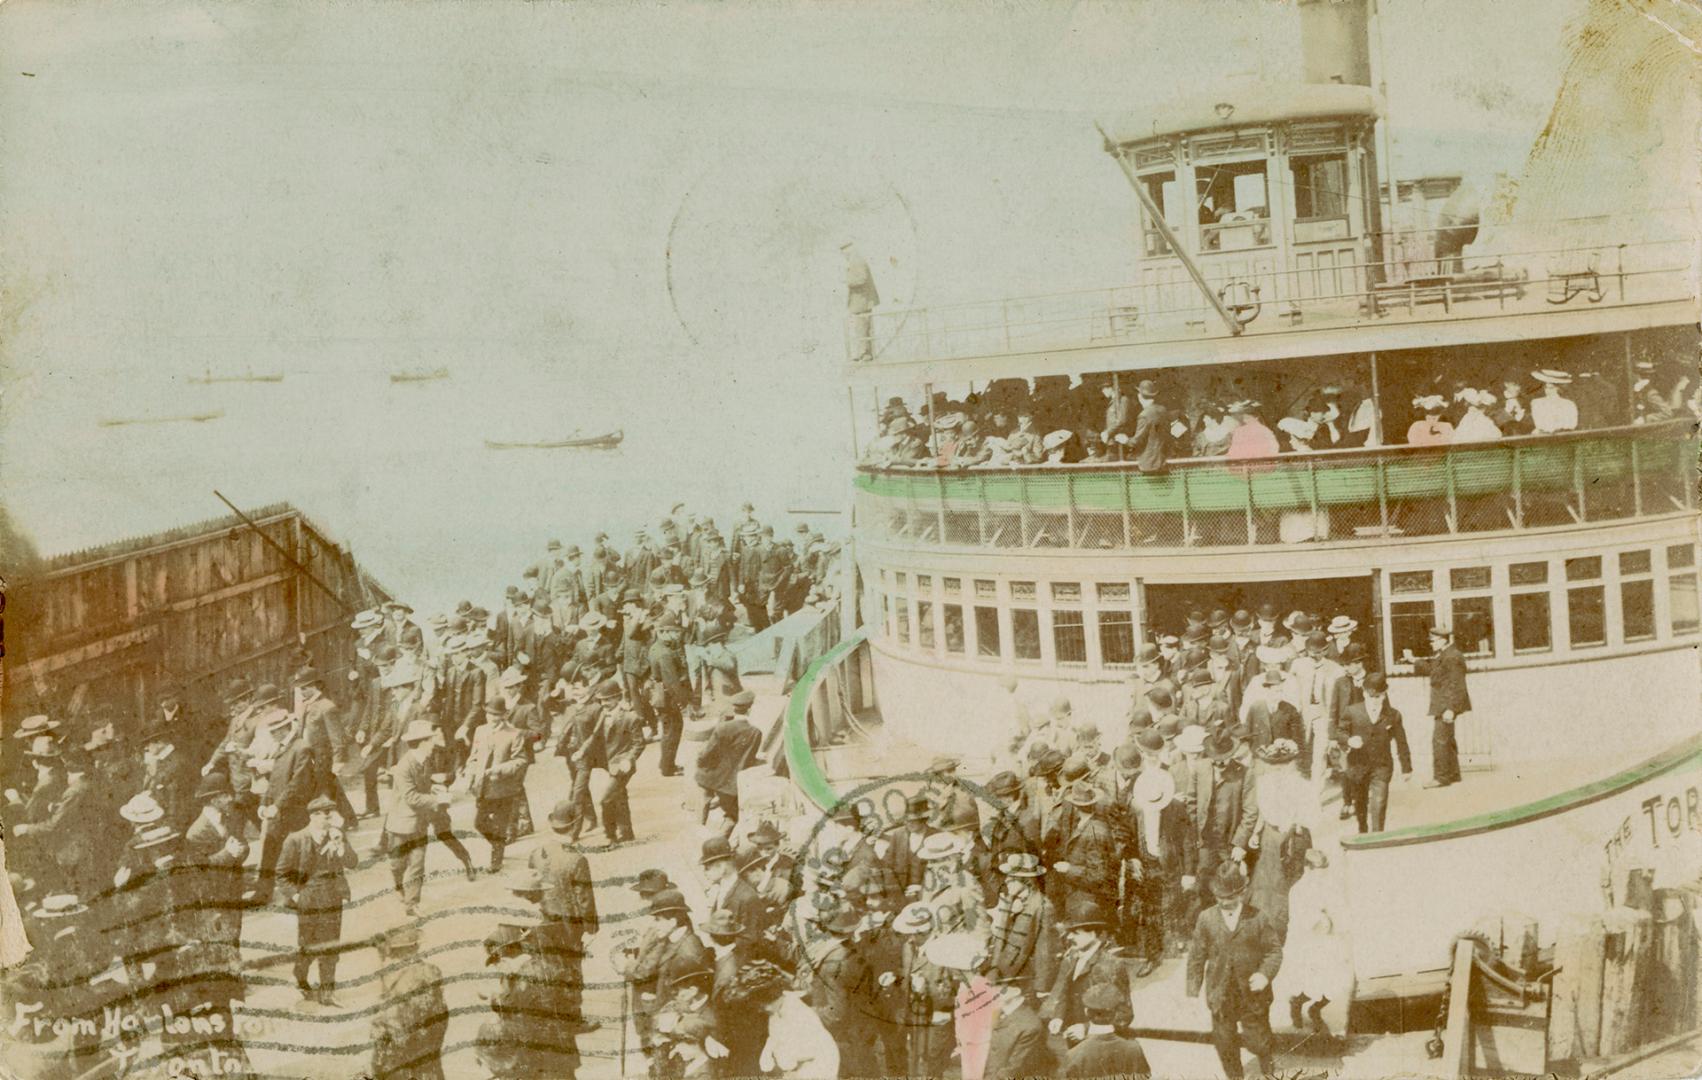 Colorized photograph of a ferry docked and passengers disembarking.